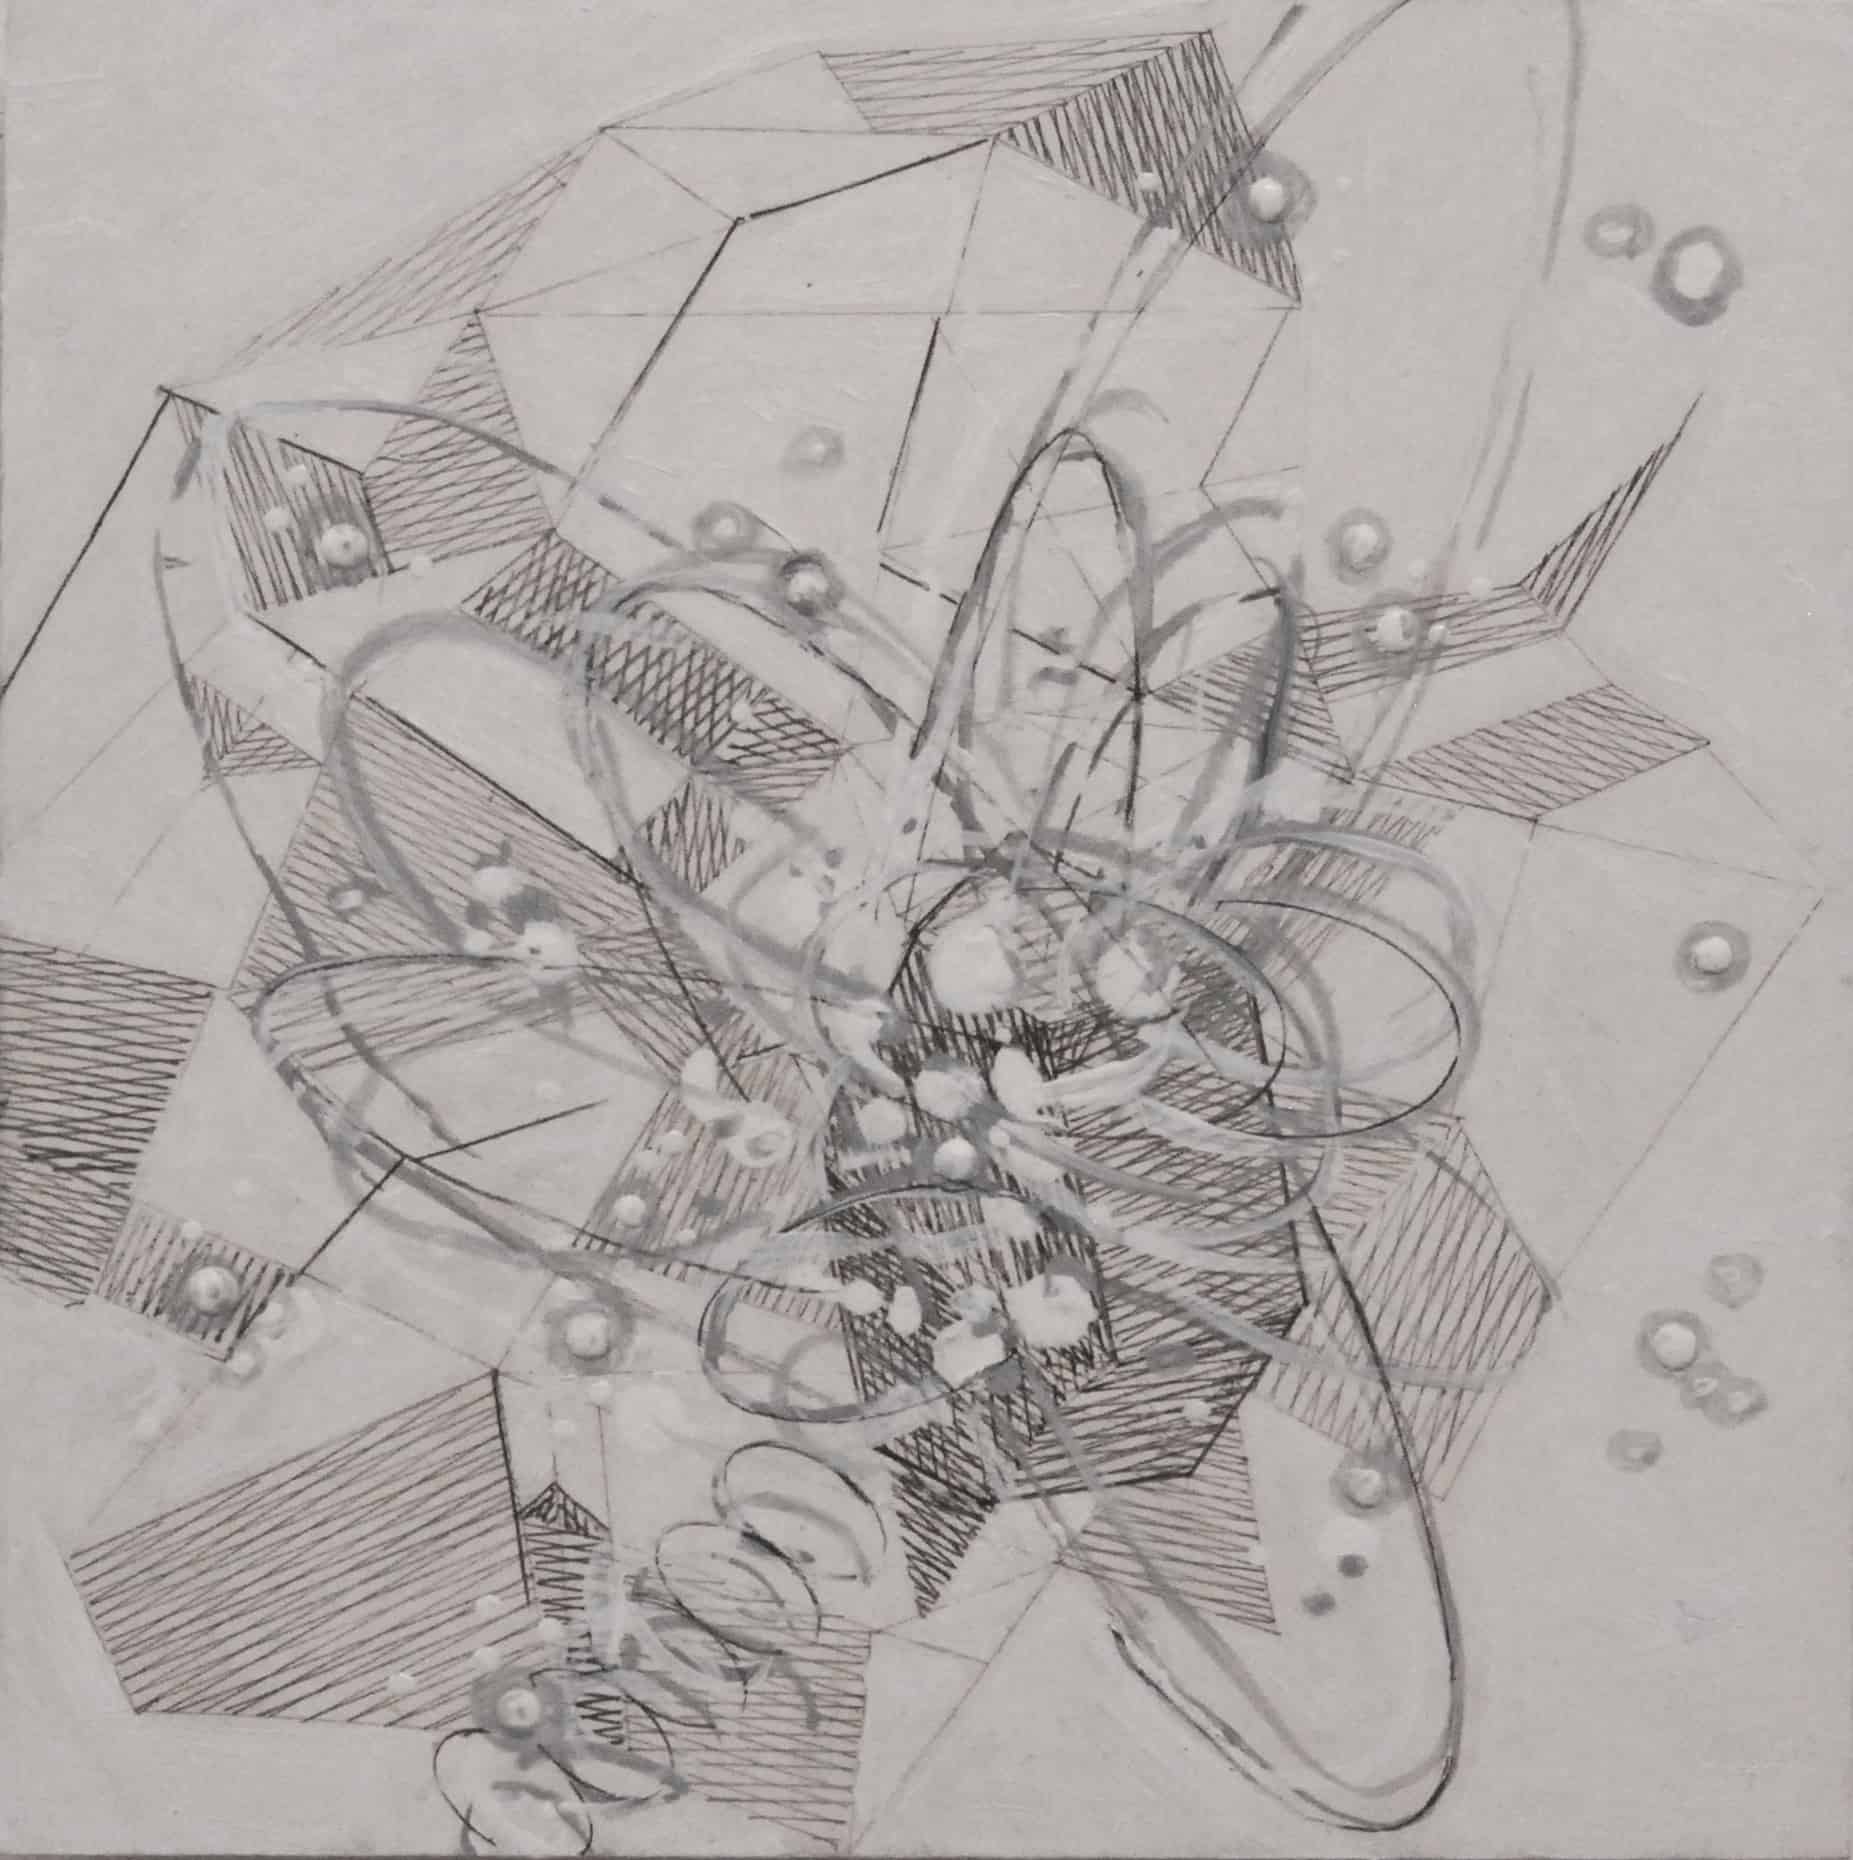 Roundabout Orbit, painting from Tesseract Study 21-F-04, 2021, graphite pencil & oil on board (black frame), 8 x 8